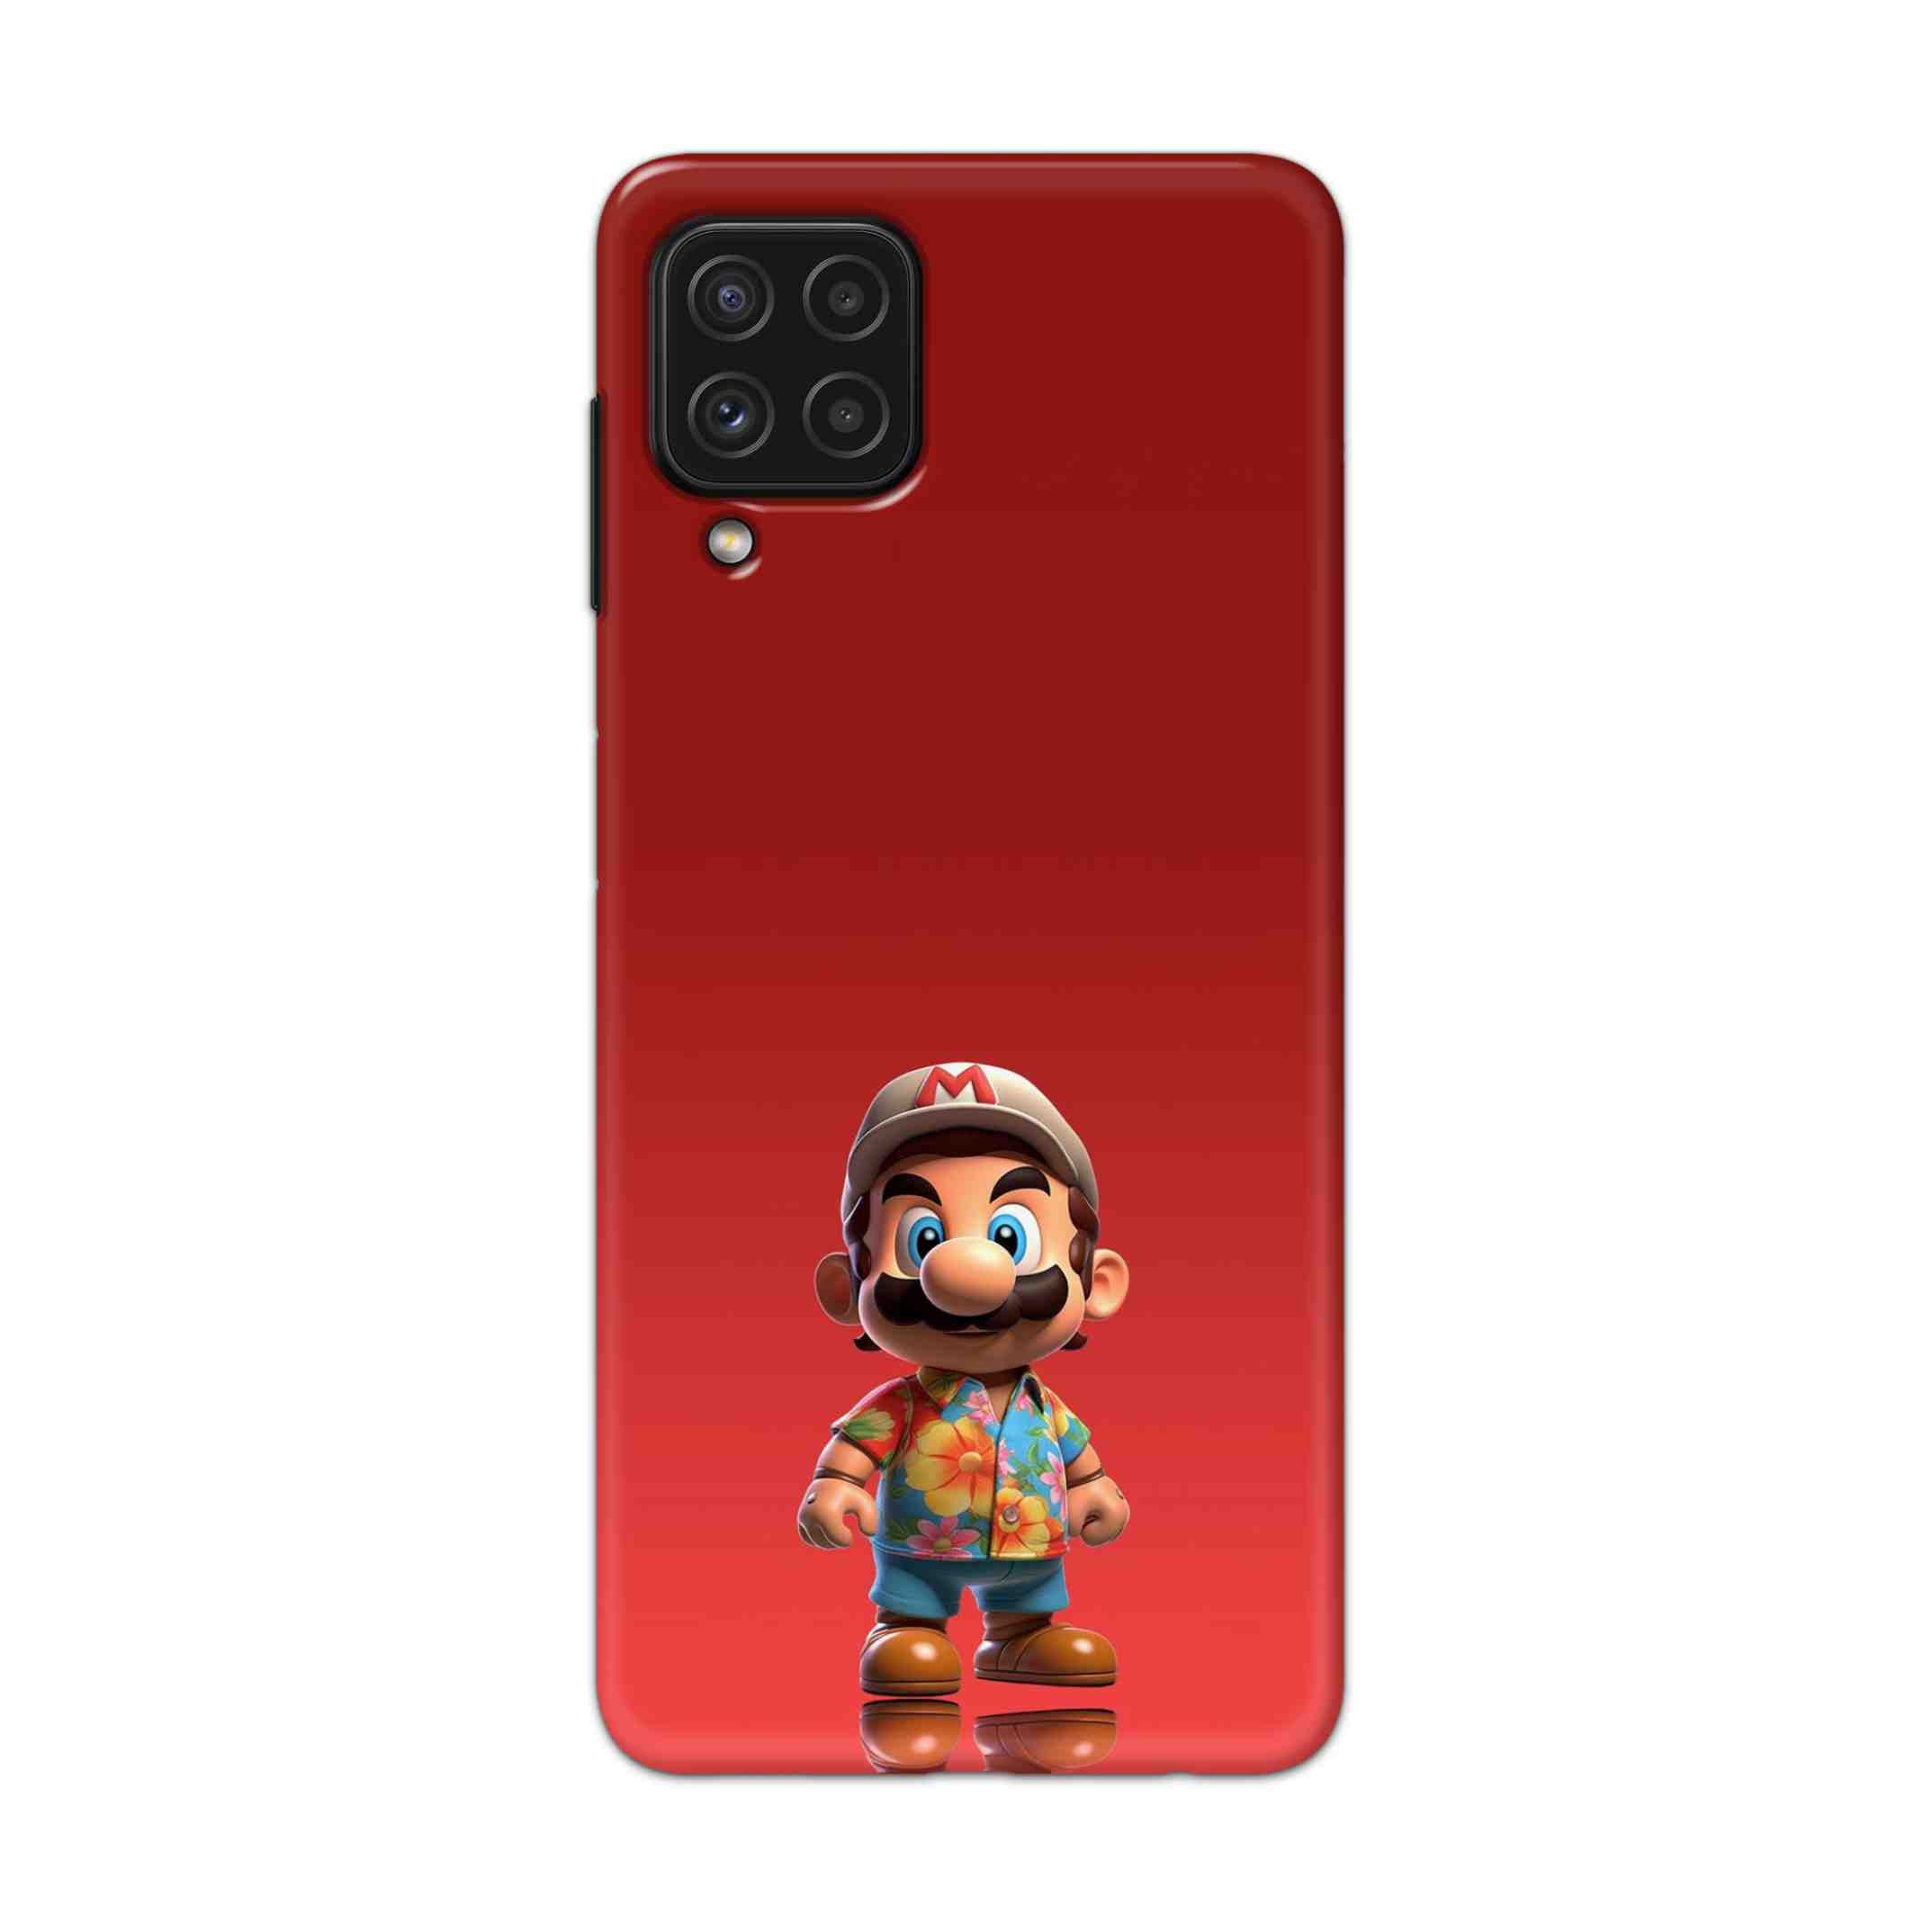 Buy Mario Hard Back Mobile Phone Case Cover For Samsung Galaxy A22 Online